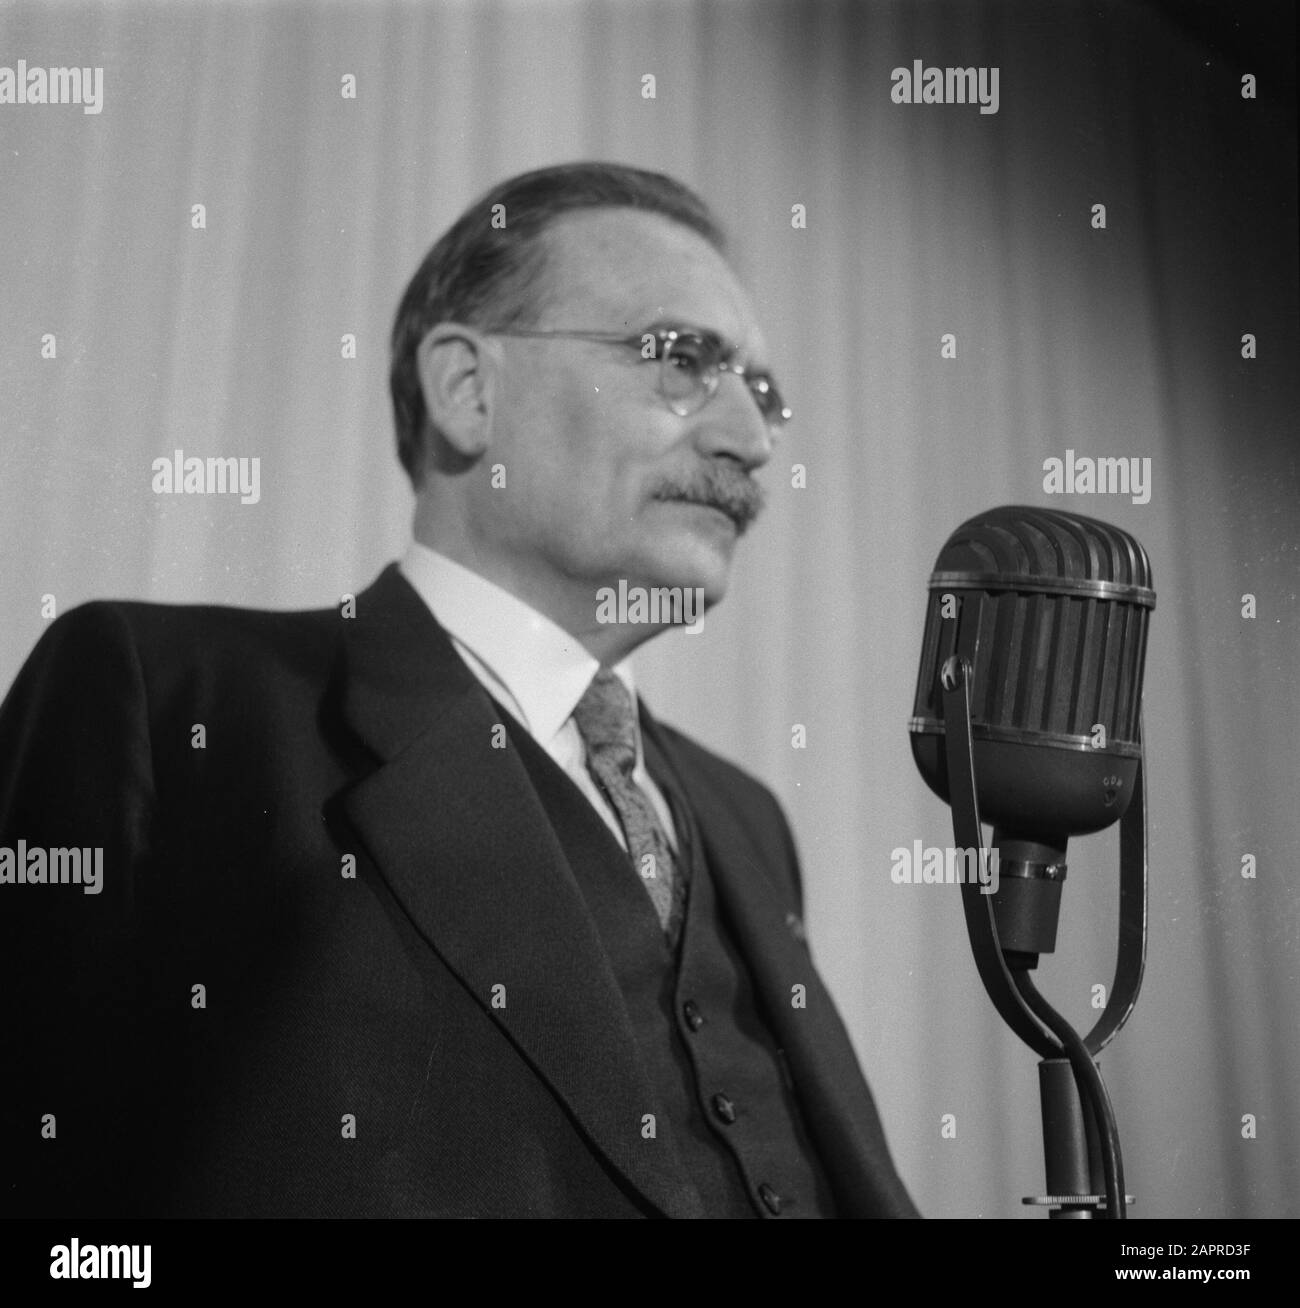 Departure Minister President Drees to America Date: 11 January 1952 Location: America Keywords: DEPARTURE Personname: Drees, Willem Stock Photo